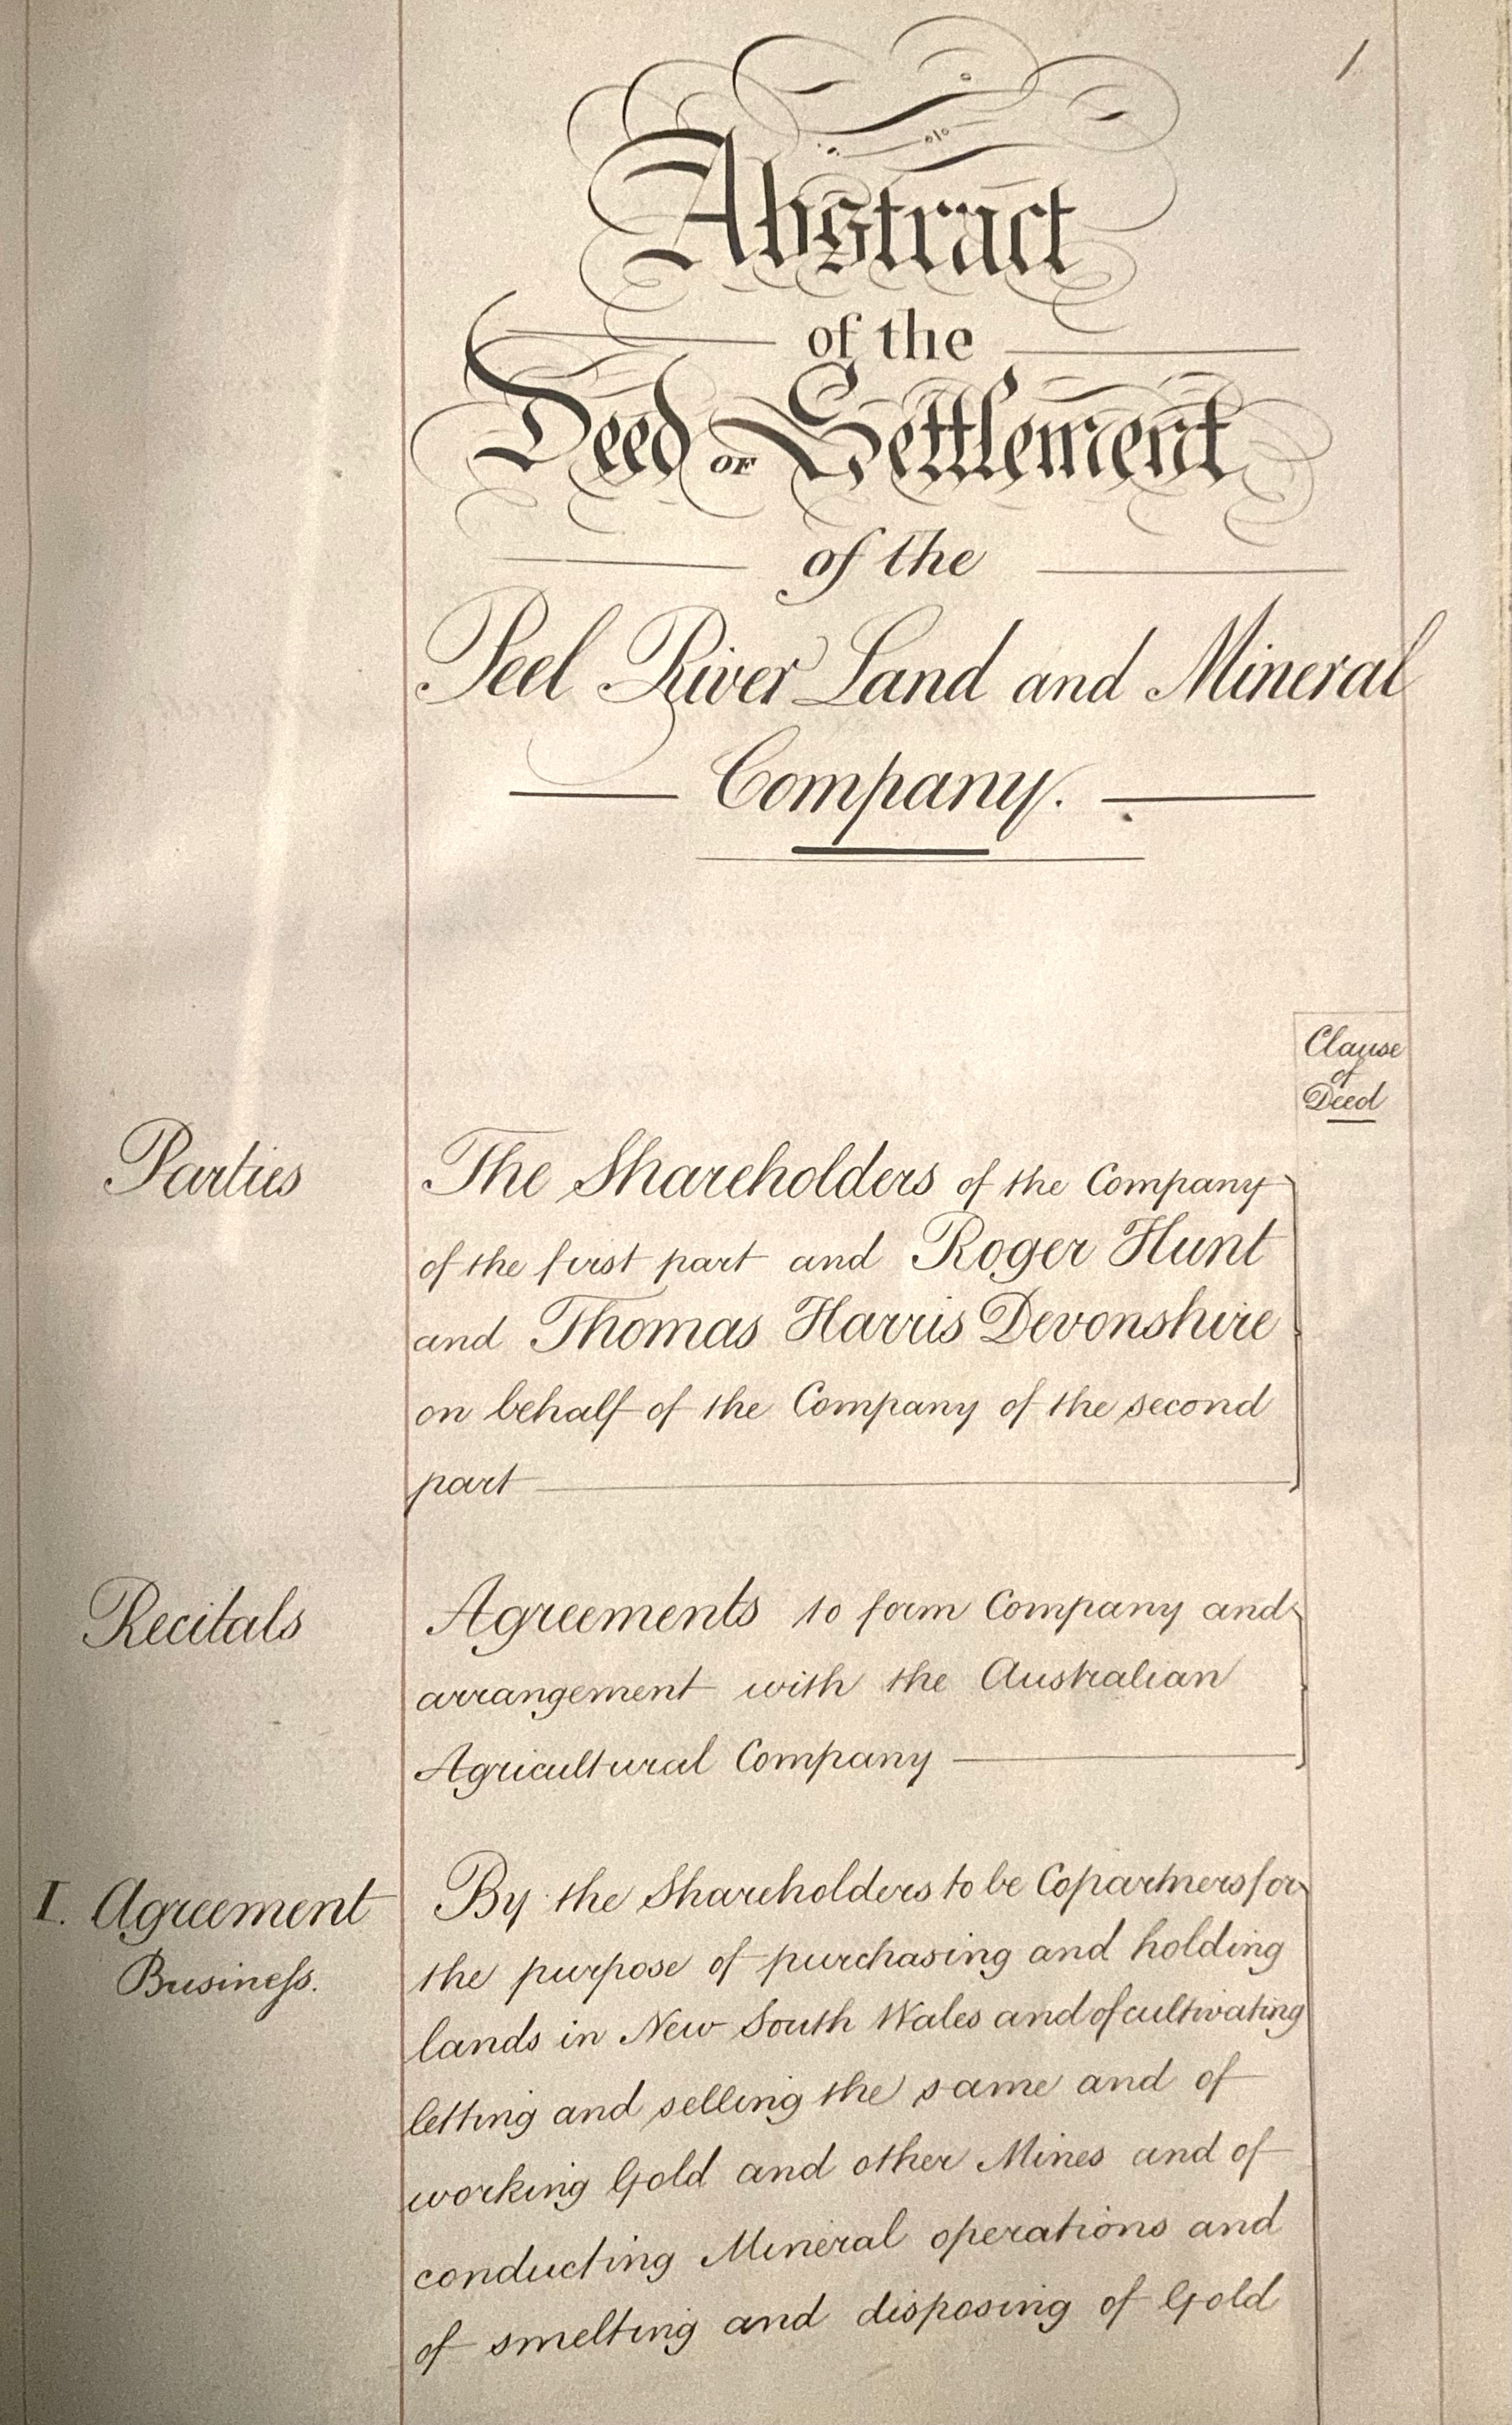 Peel River Land and Mineral Company abstract of deed of settlement, 1853.